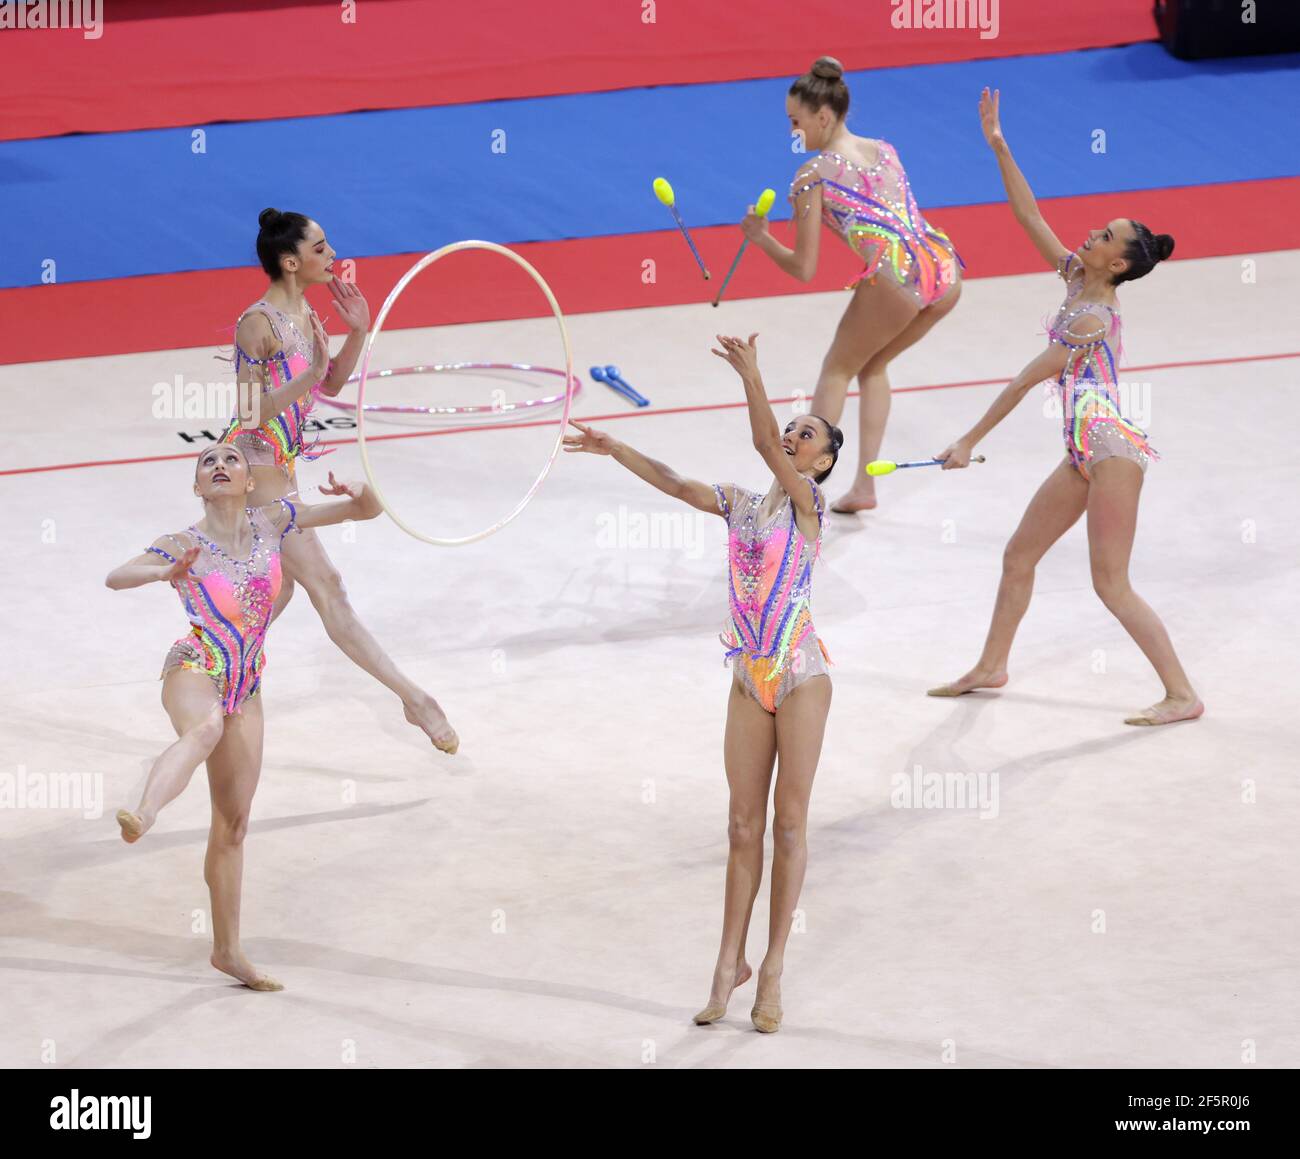 Sofia, Bulgaria - 27 March, 2021: Team Spain perform during the 3 Hoops + 2  pairs of Clubs group qualifications at the 2021 Rhythmic Gymnastics Sofia  World Cup Stock Photo - Alamy